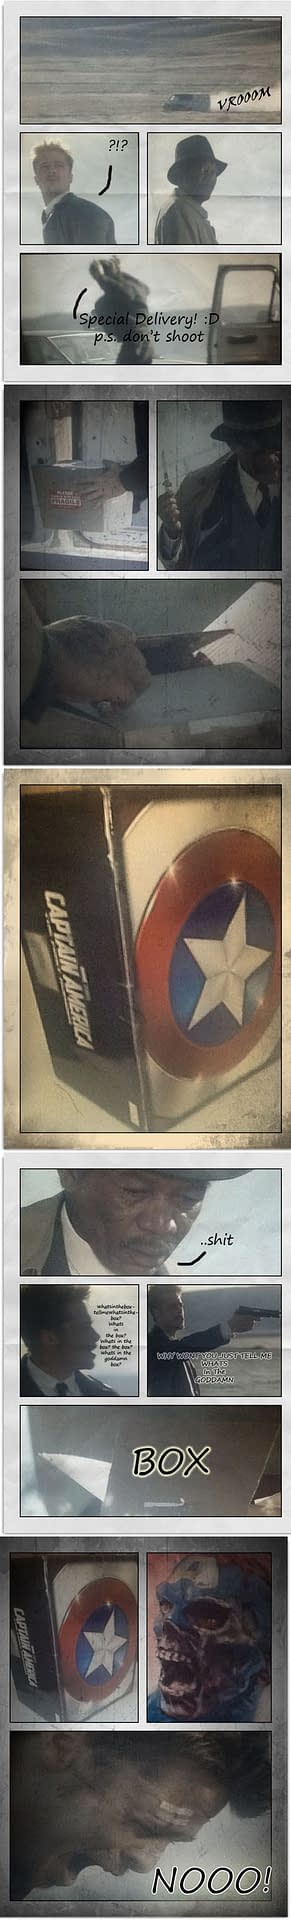 What's In The Box? A Look Inside The Hasbro Captain America Mystery